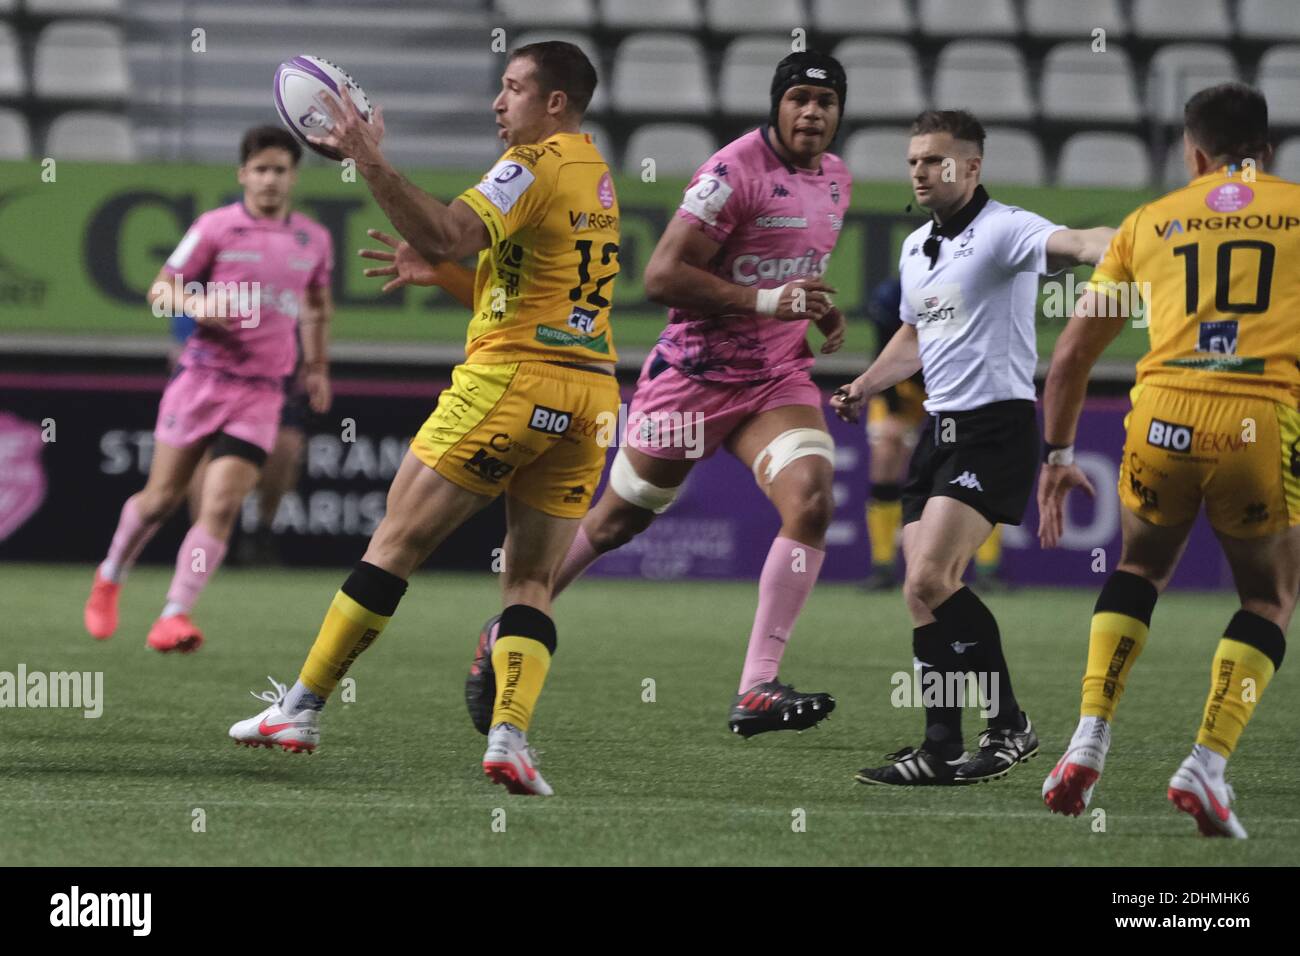 Paris, France. 11th Dec, 2020. Trevise Centre TOMMASO BENVENUTI in action during the Europpean Challenge Rugby Cup Day one between Stade Francais and Benetton Rugby Trevise at Jean Bouin Stadium in Paris - France.Trevise won 44-20 Credit: Pierre Stevenin/ZUMA Wire/Alamy Live News Stock Photo